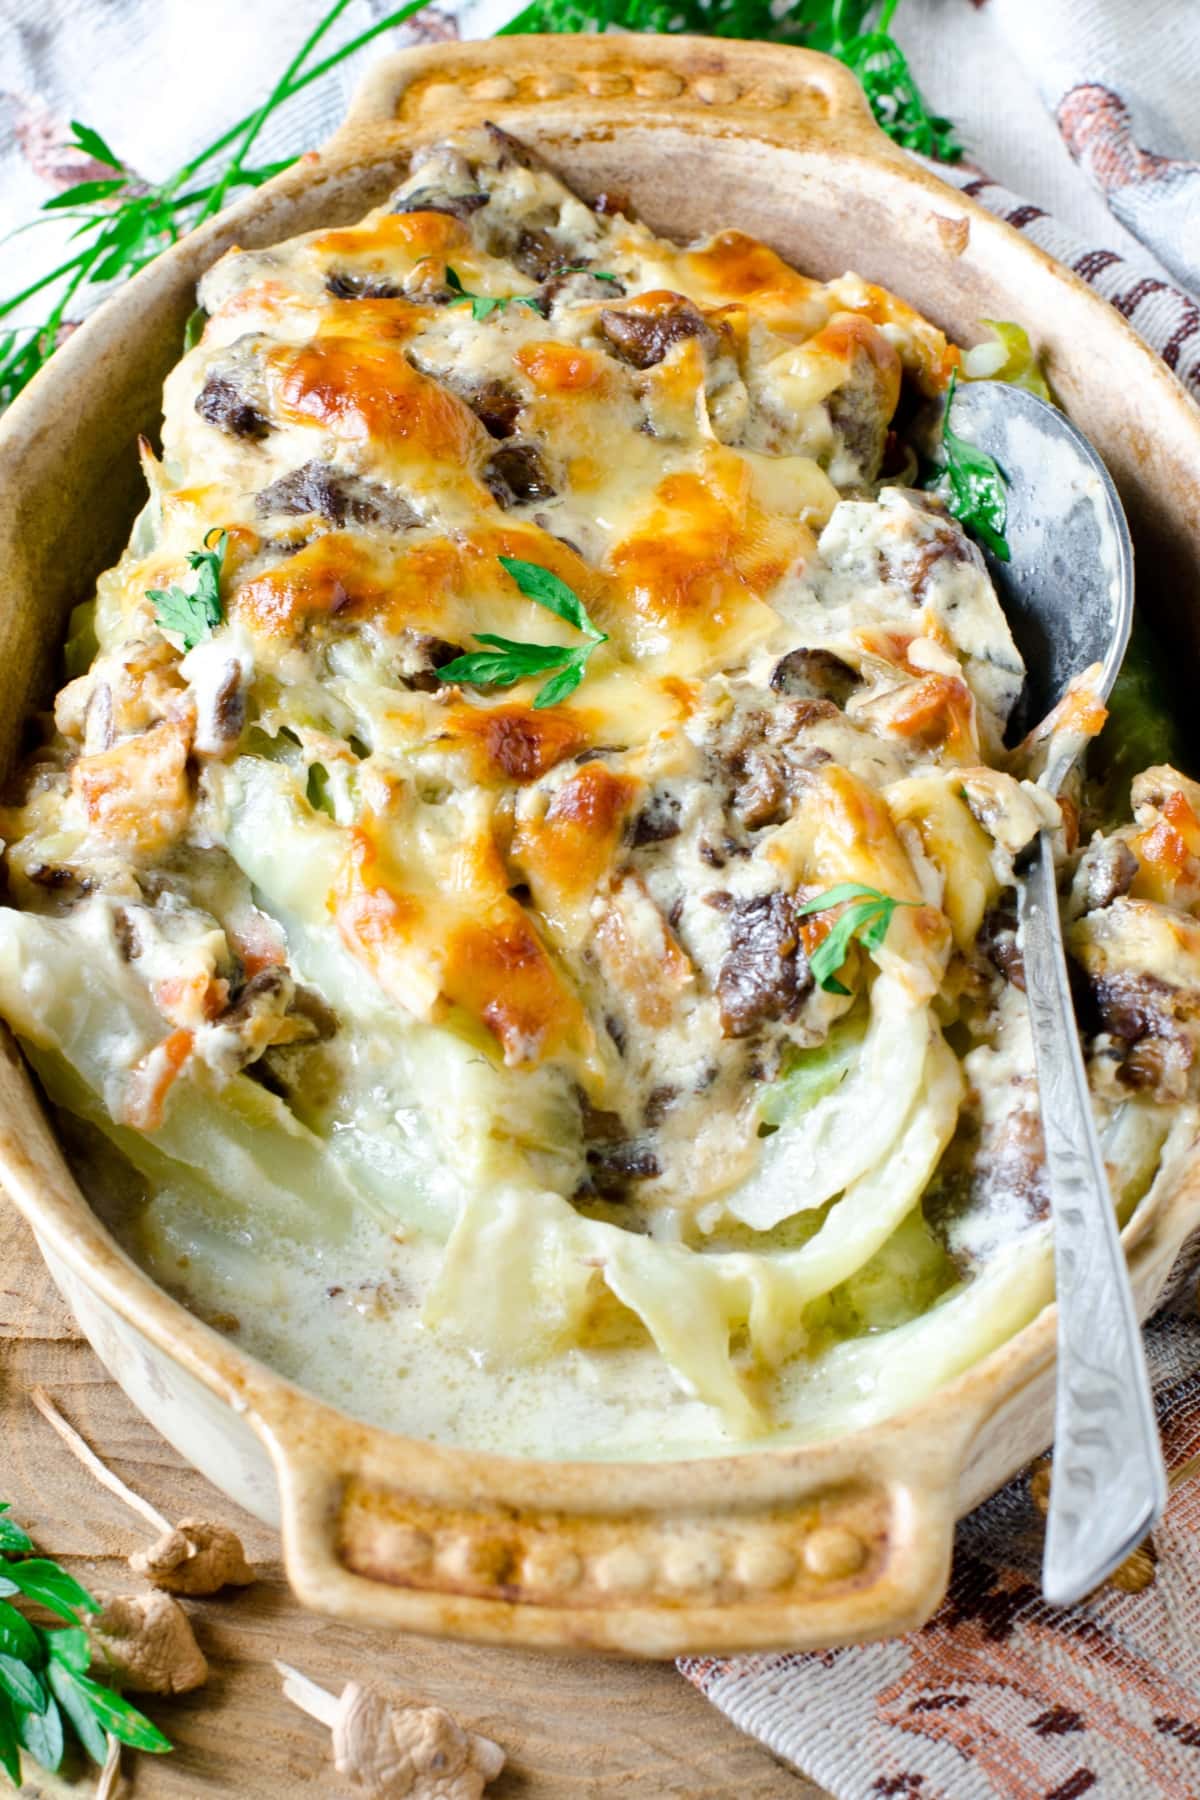 Creamy Cabbage Casserole with Mushrooms, Herbs and Ground Beef